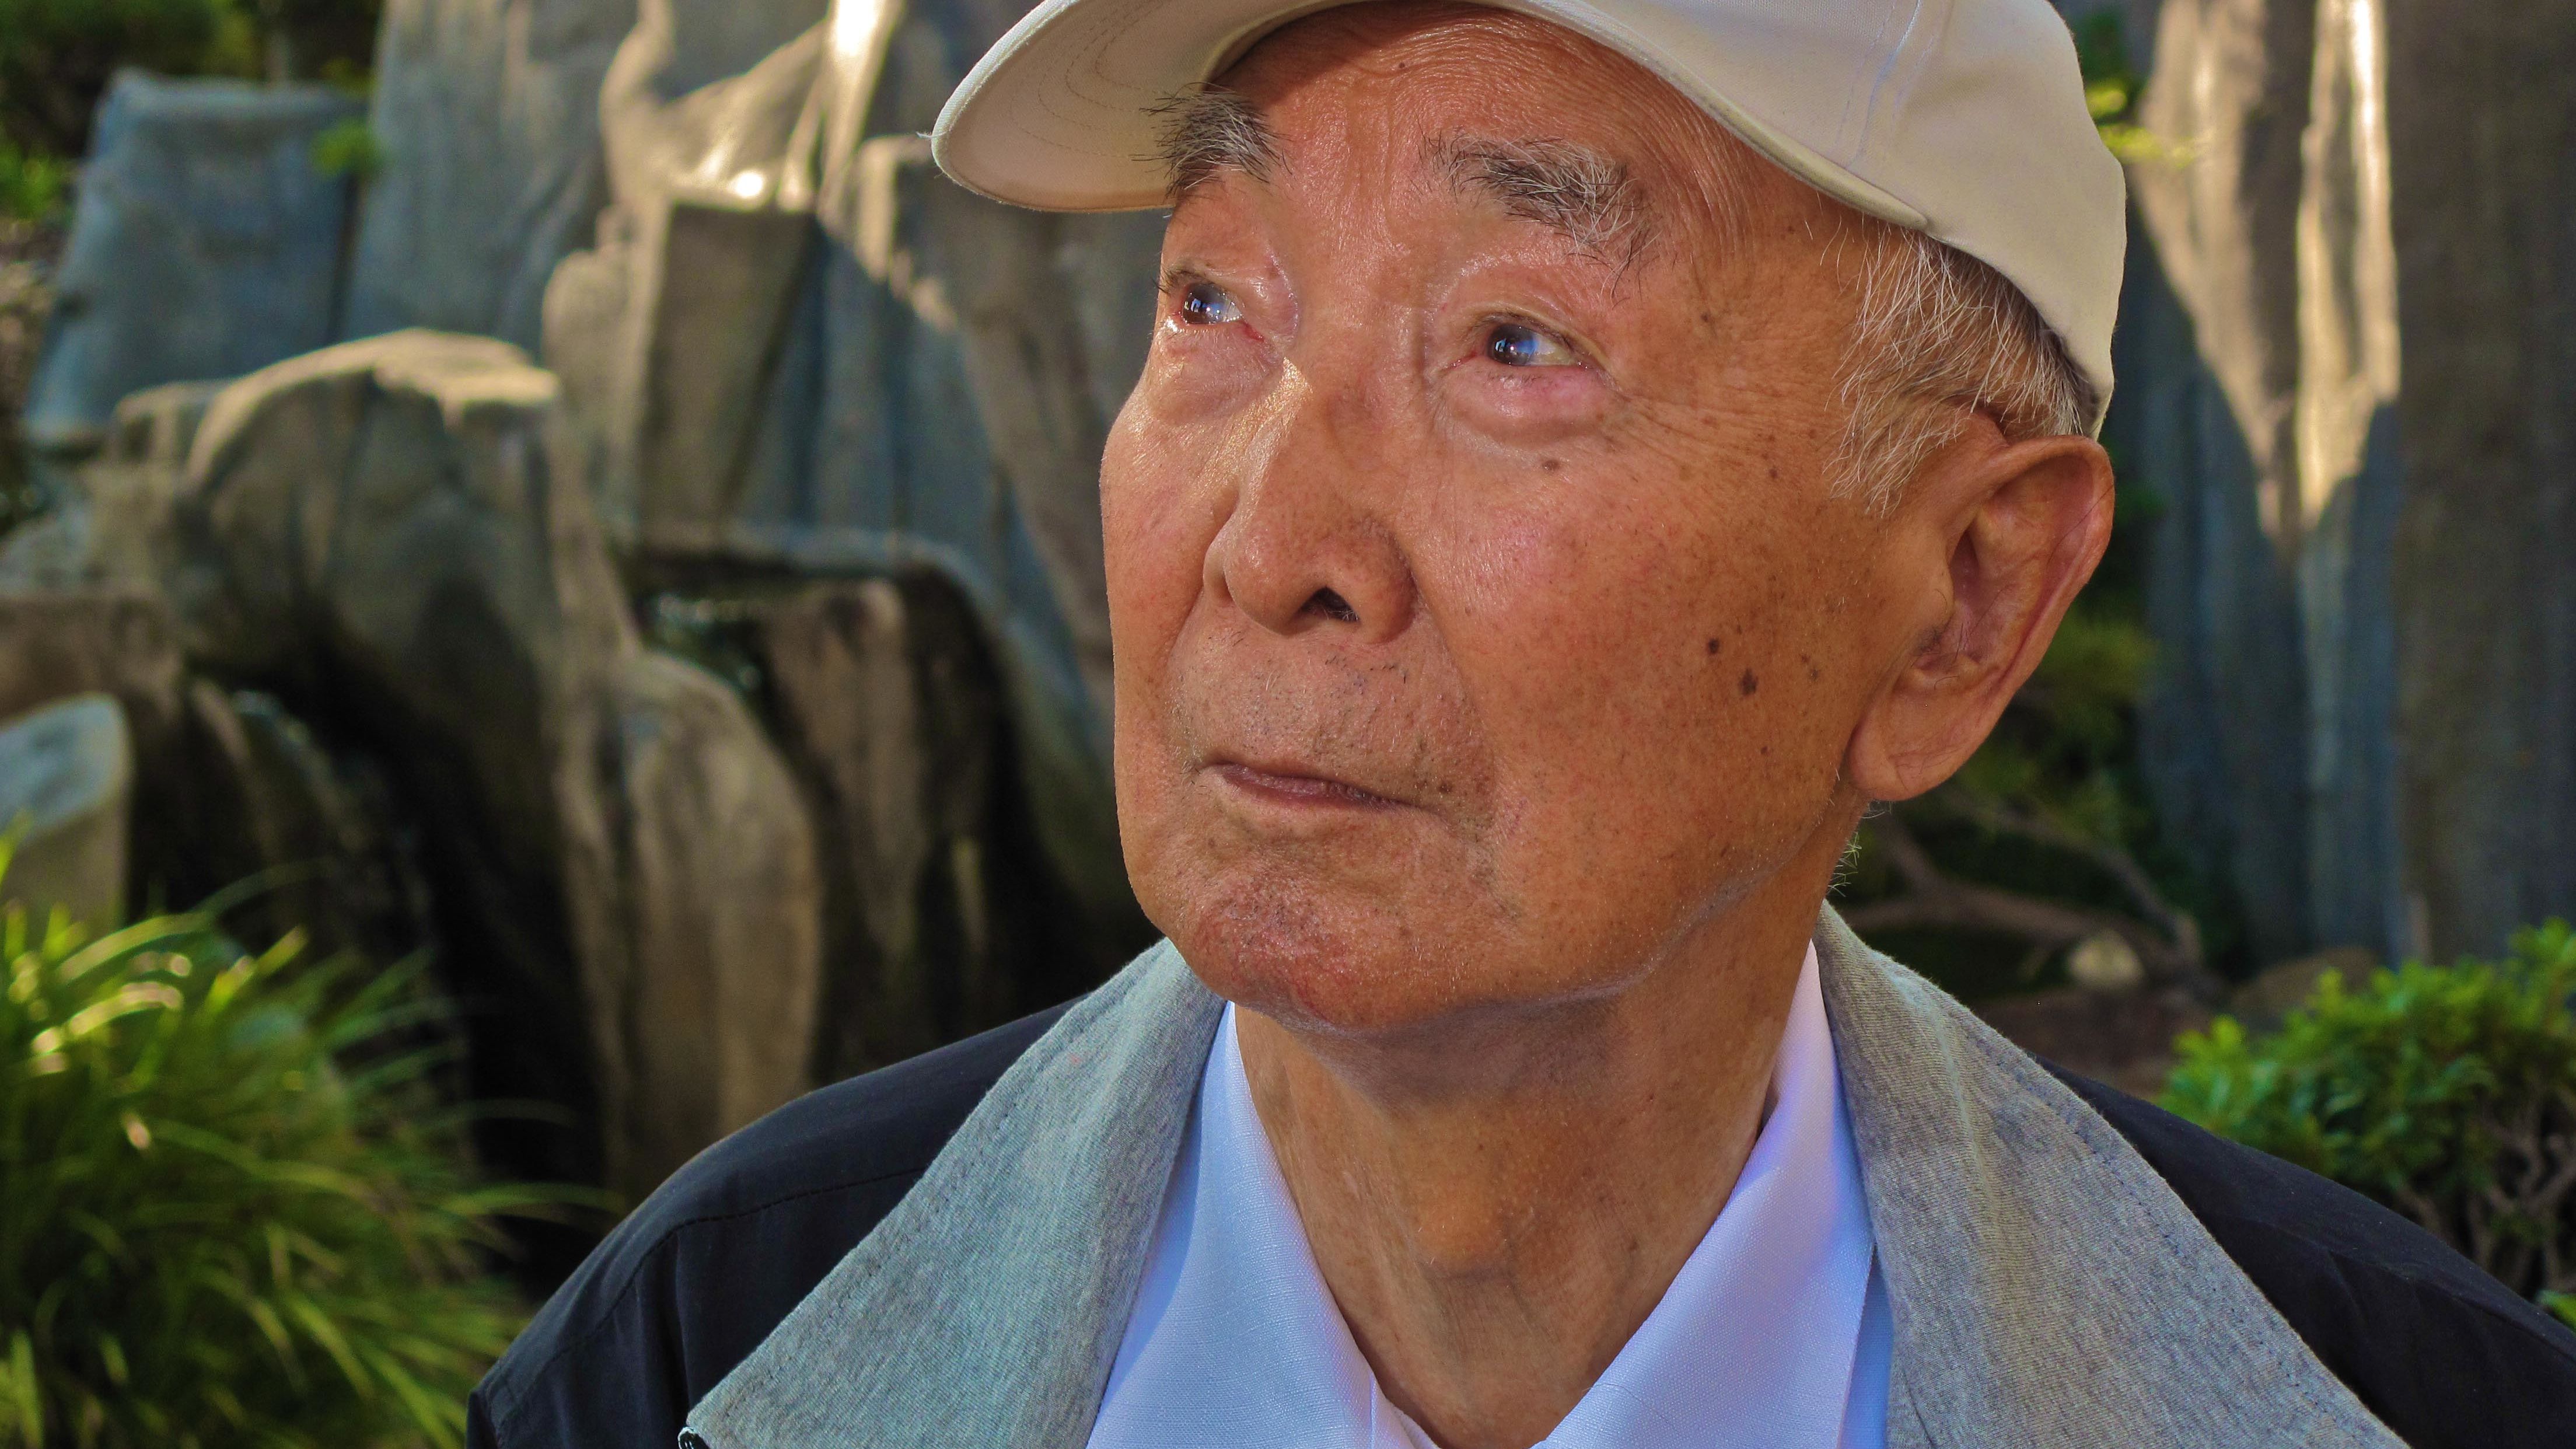 Don Oka, now 91 years old, was one of seven brothers who served in the military.